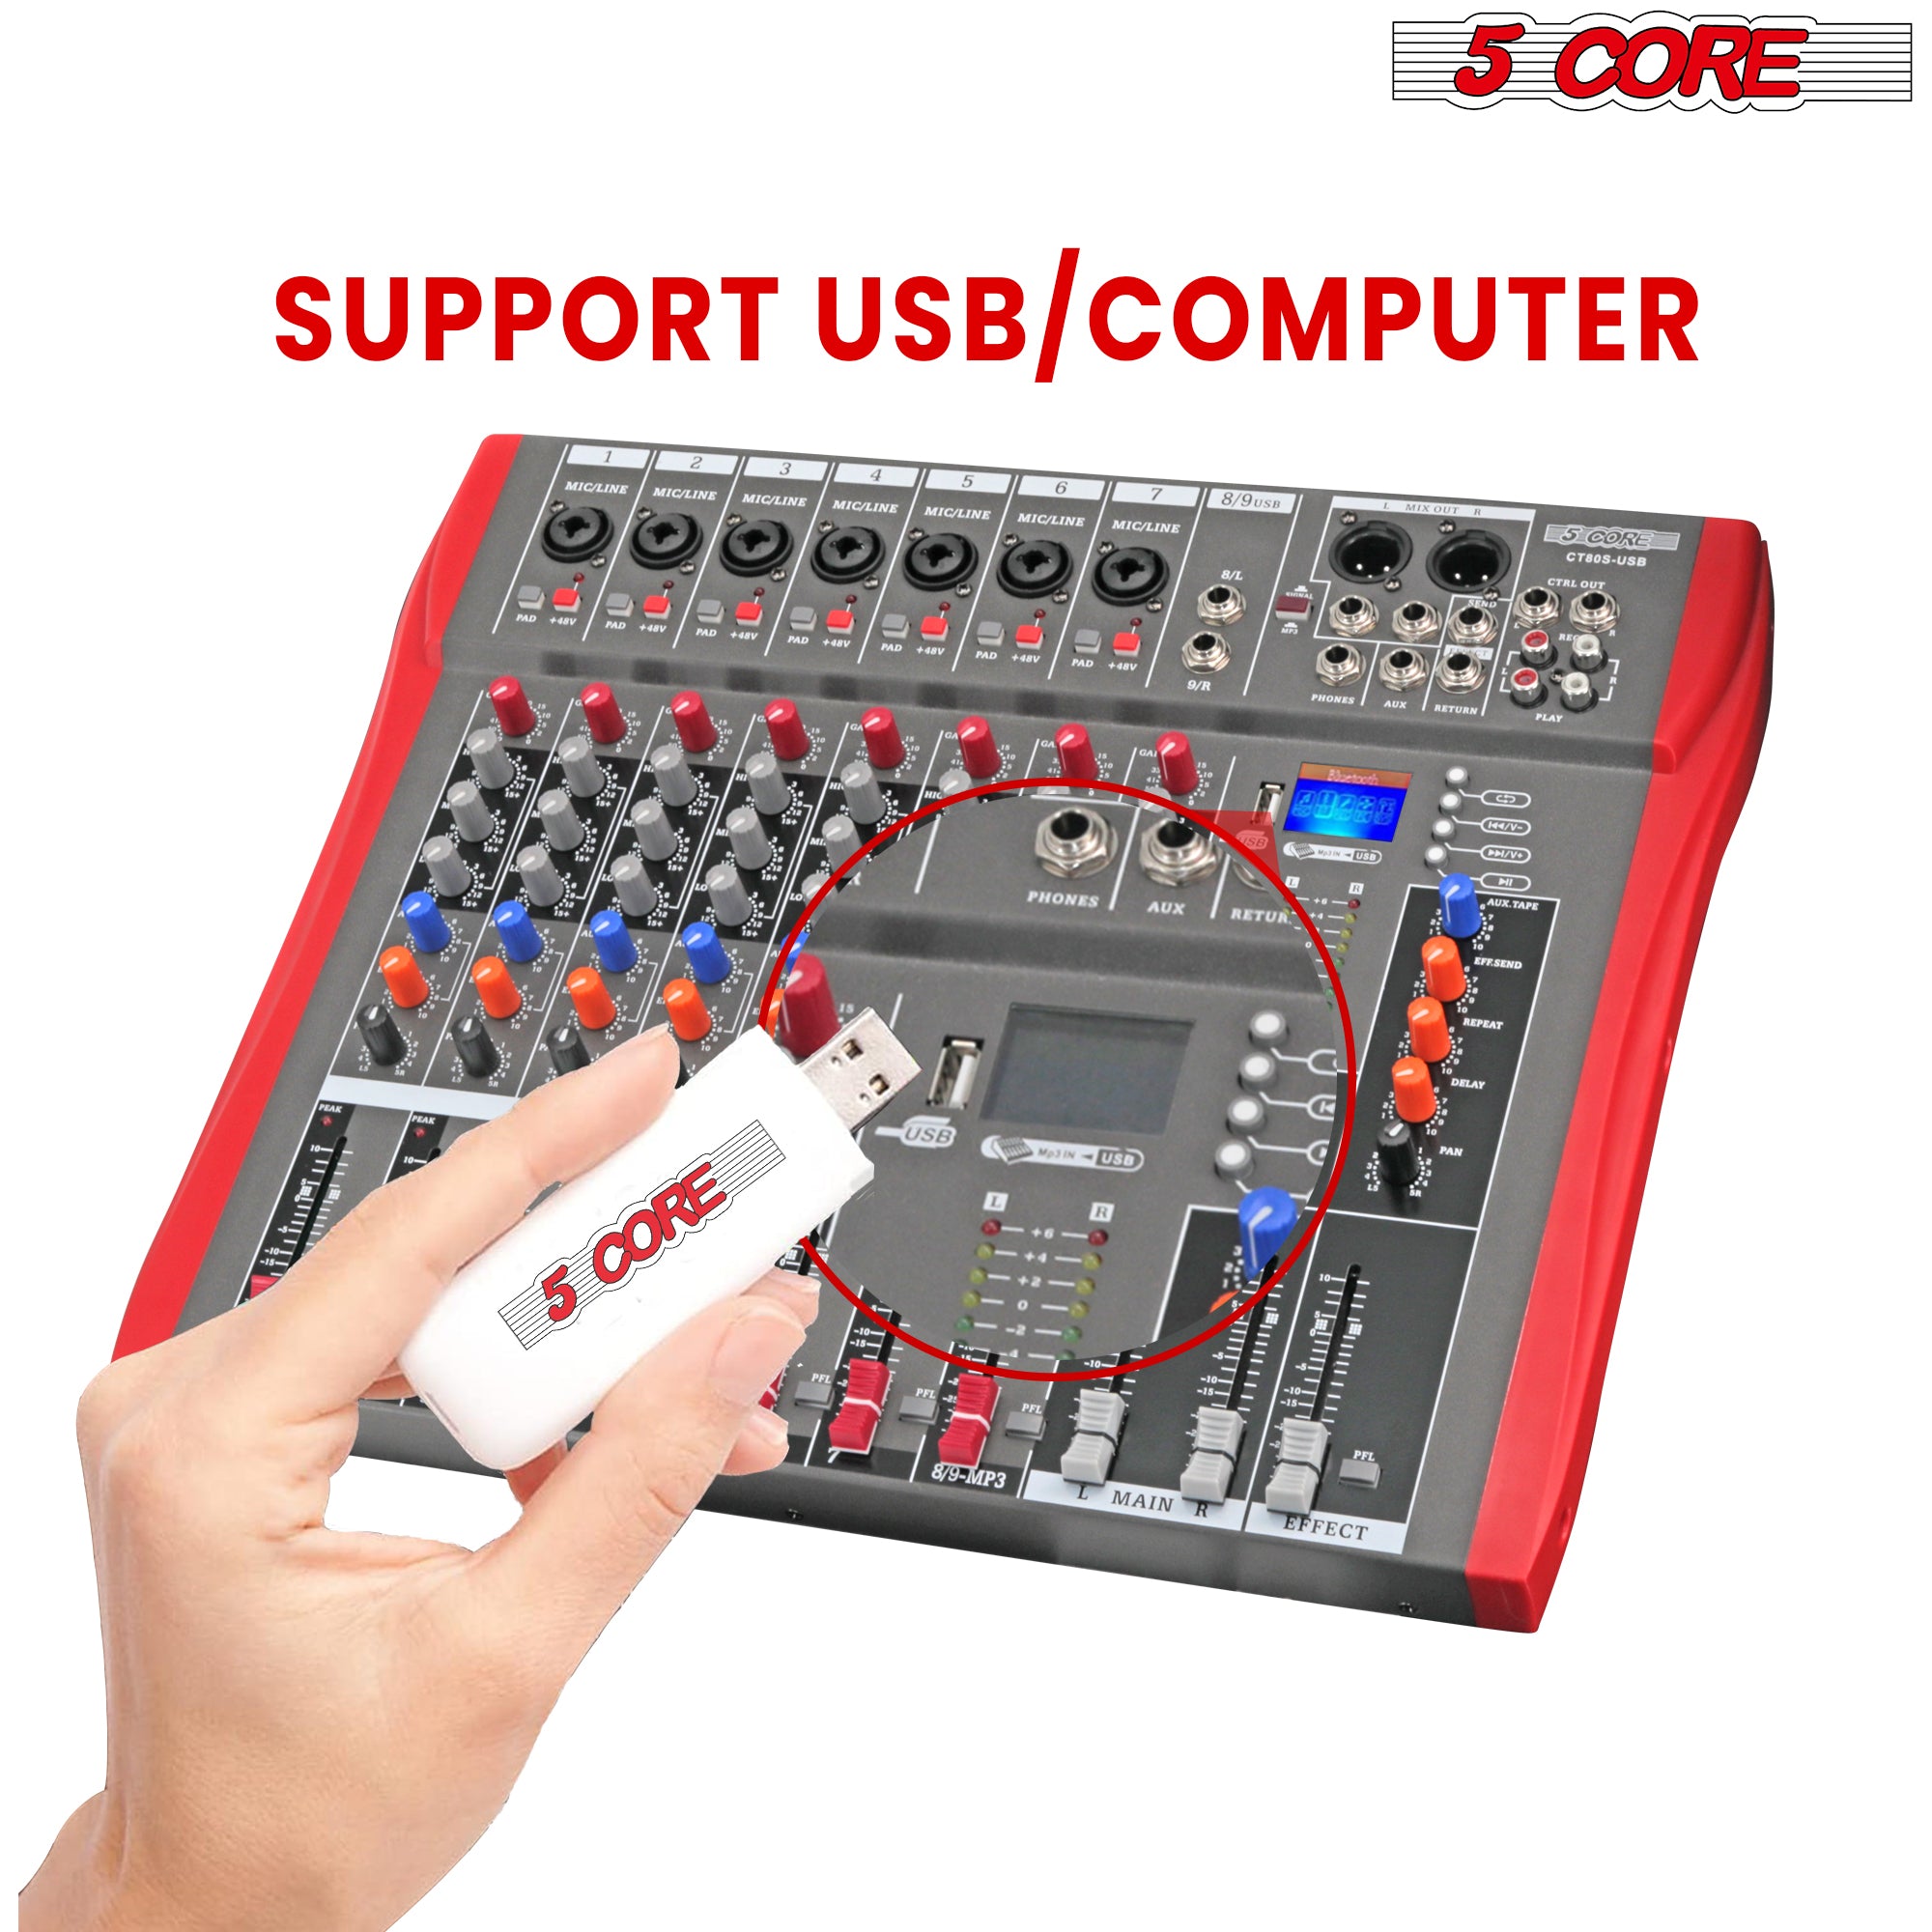 Audio mixer professional, versatile sound control with Bluetooth and USB features.